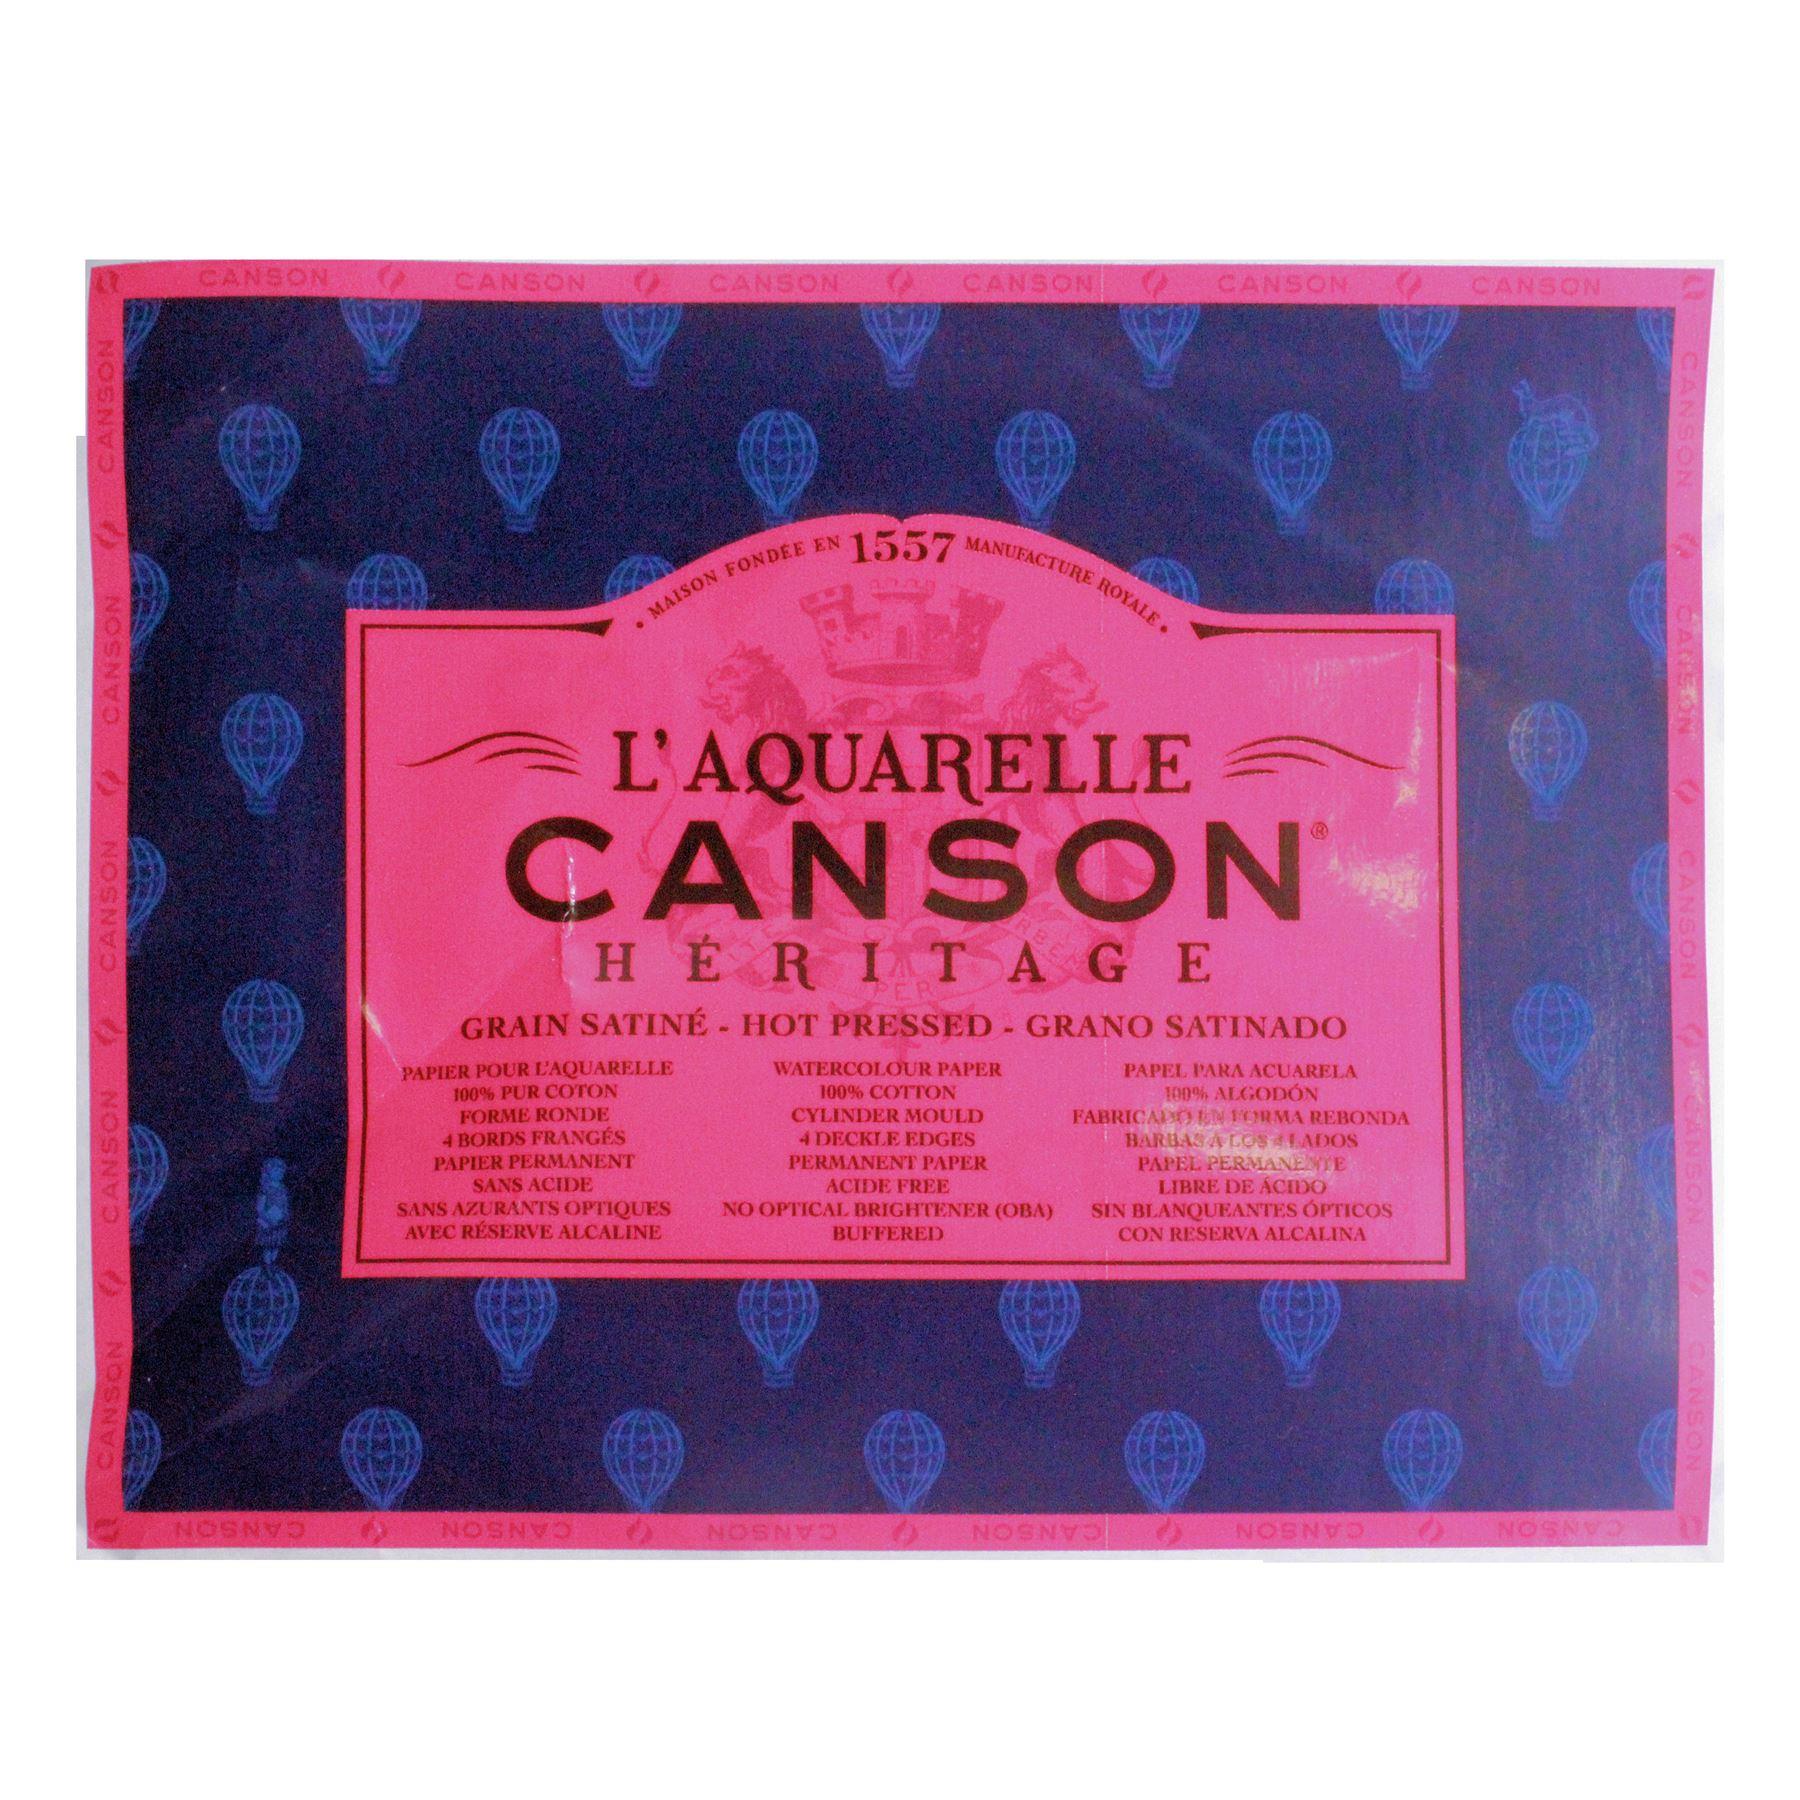 Canson L'Aquarelle Heritage artists watercolour paper sheets watermark